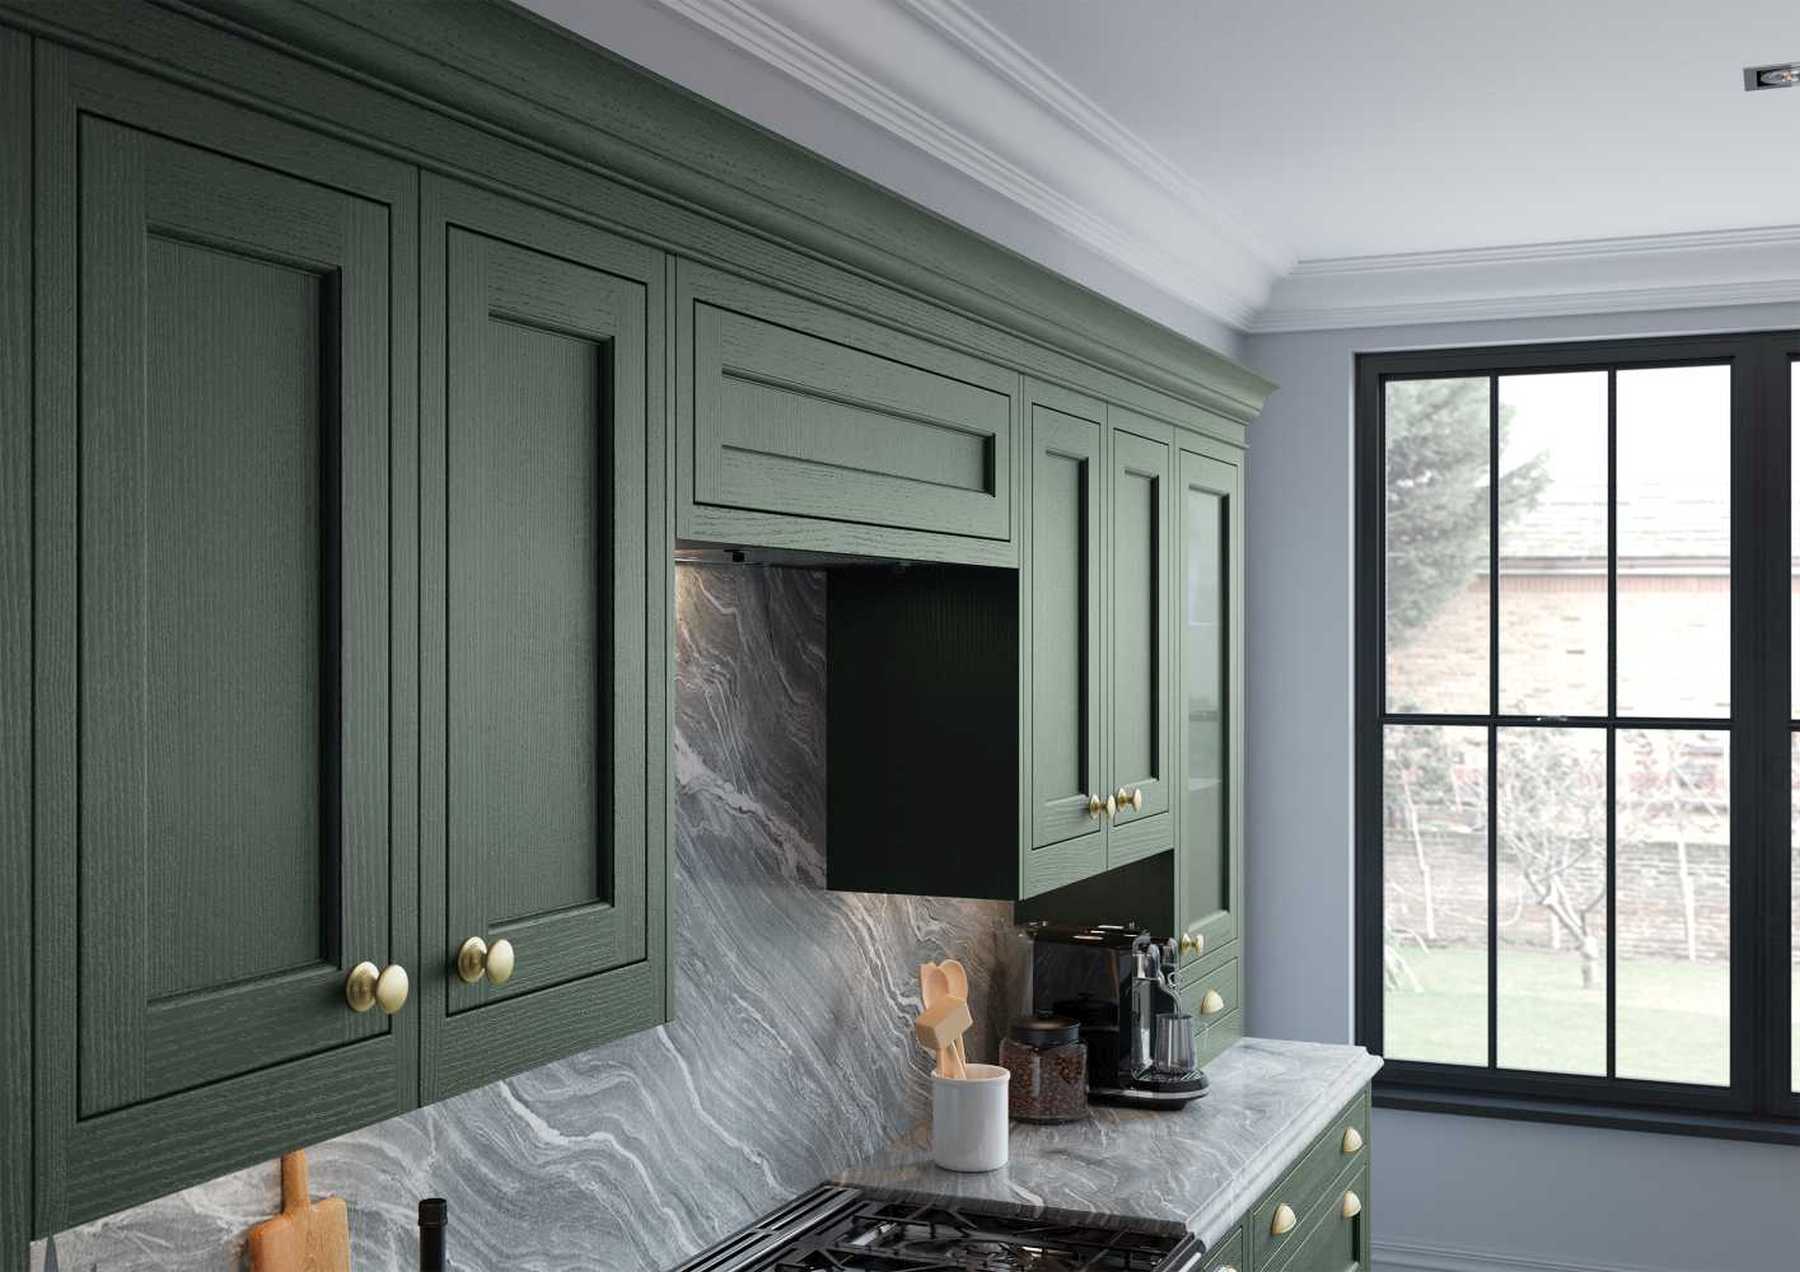 Luxurious inframe kitchen in forst green wall units